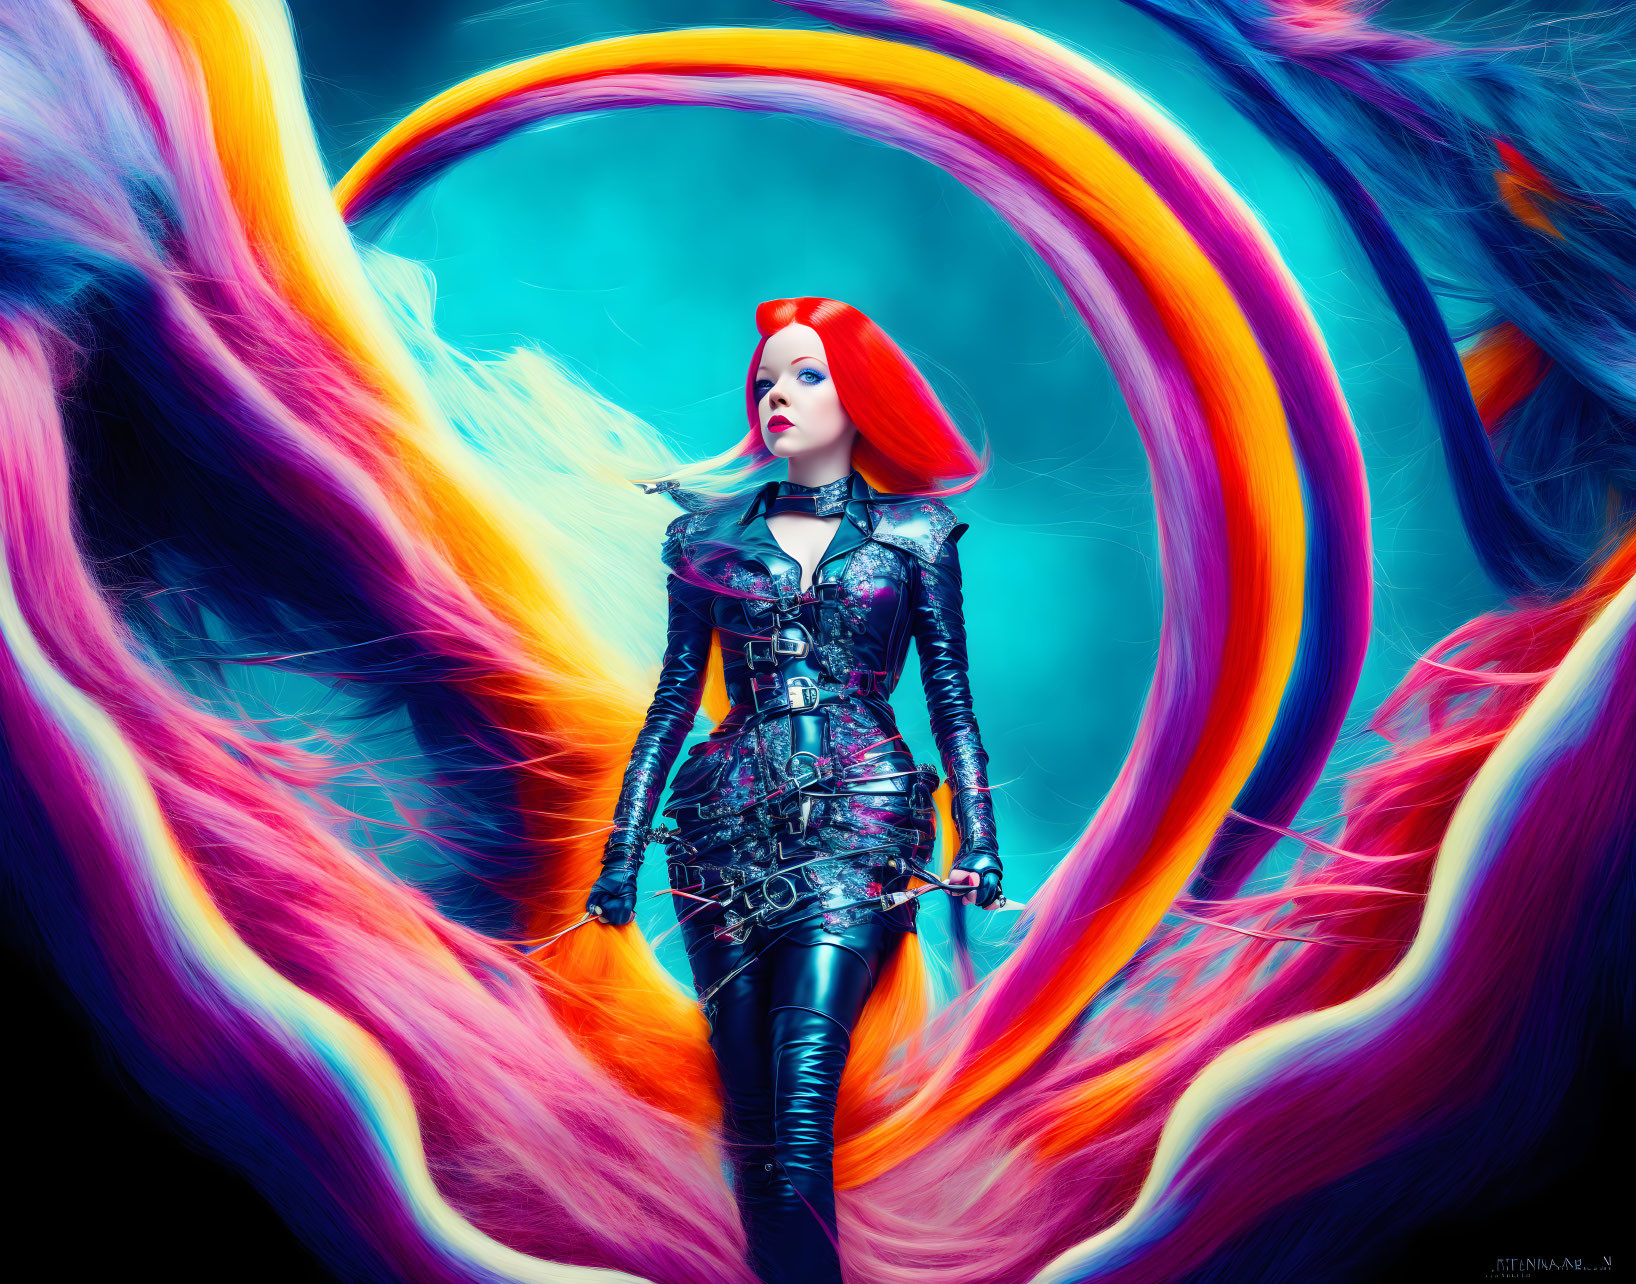 Red-haired woman in gothic attire against colorful abstract swirl